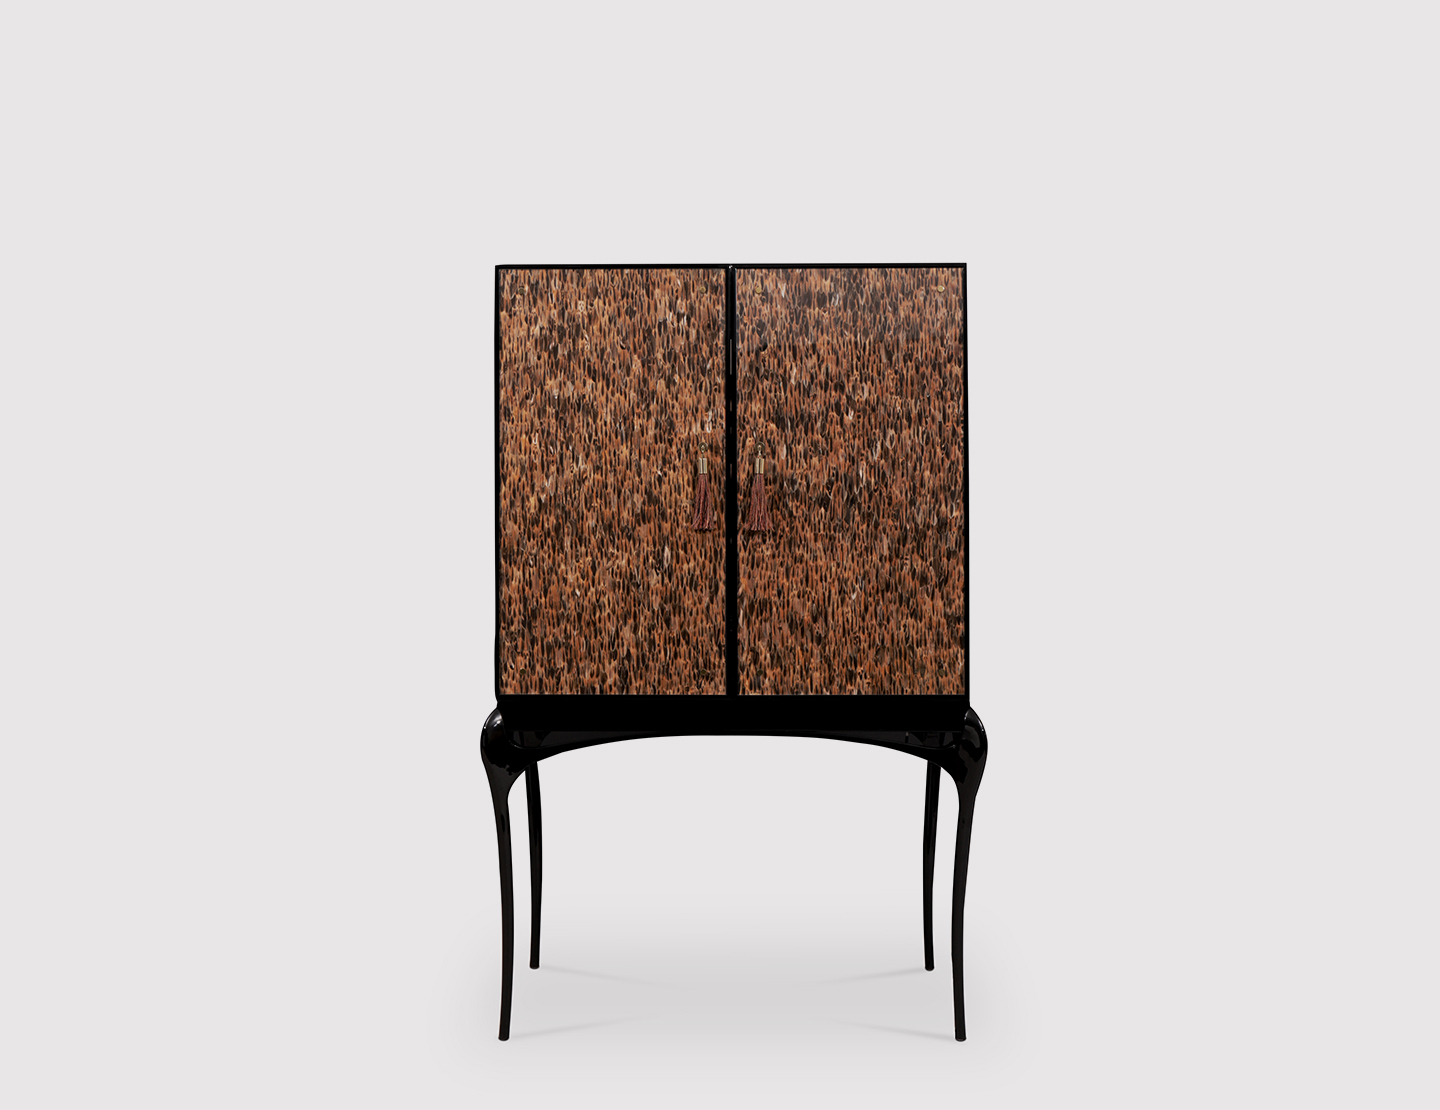 Temptation Bar Cabinet Exotic Cabinet Koket intended for size 1440 X 1110